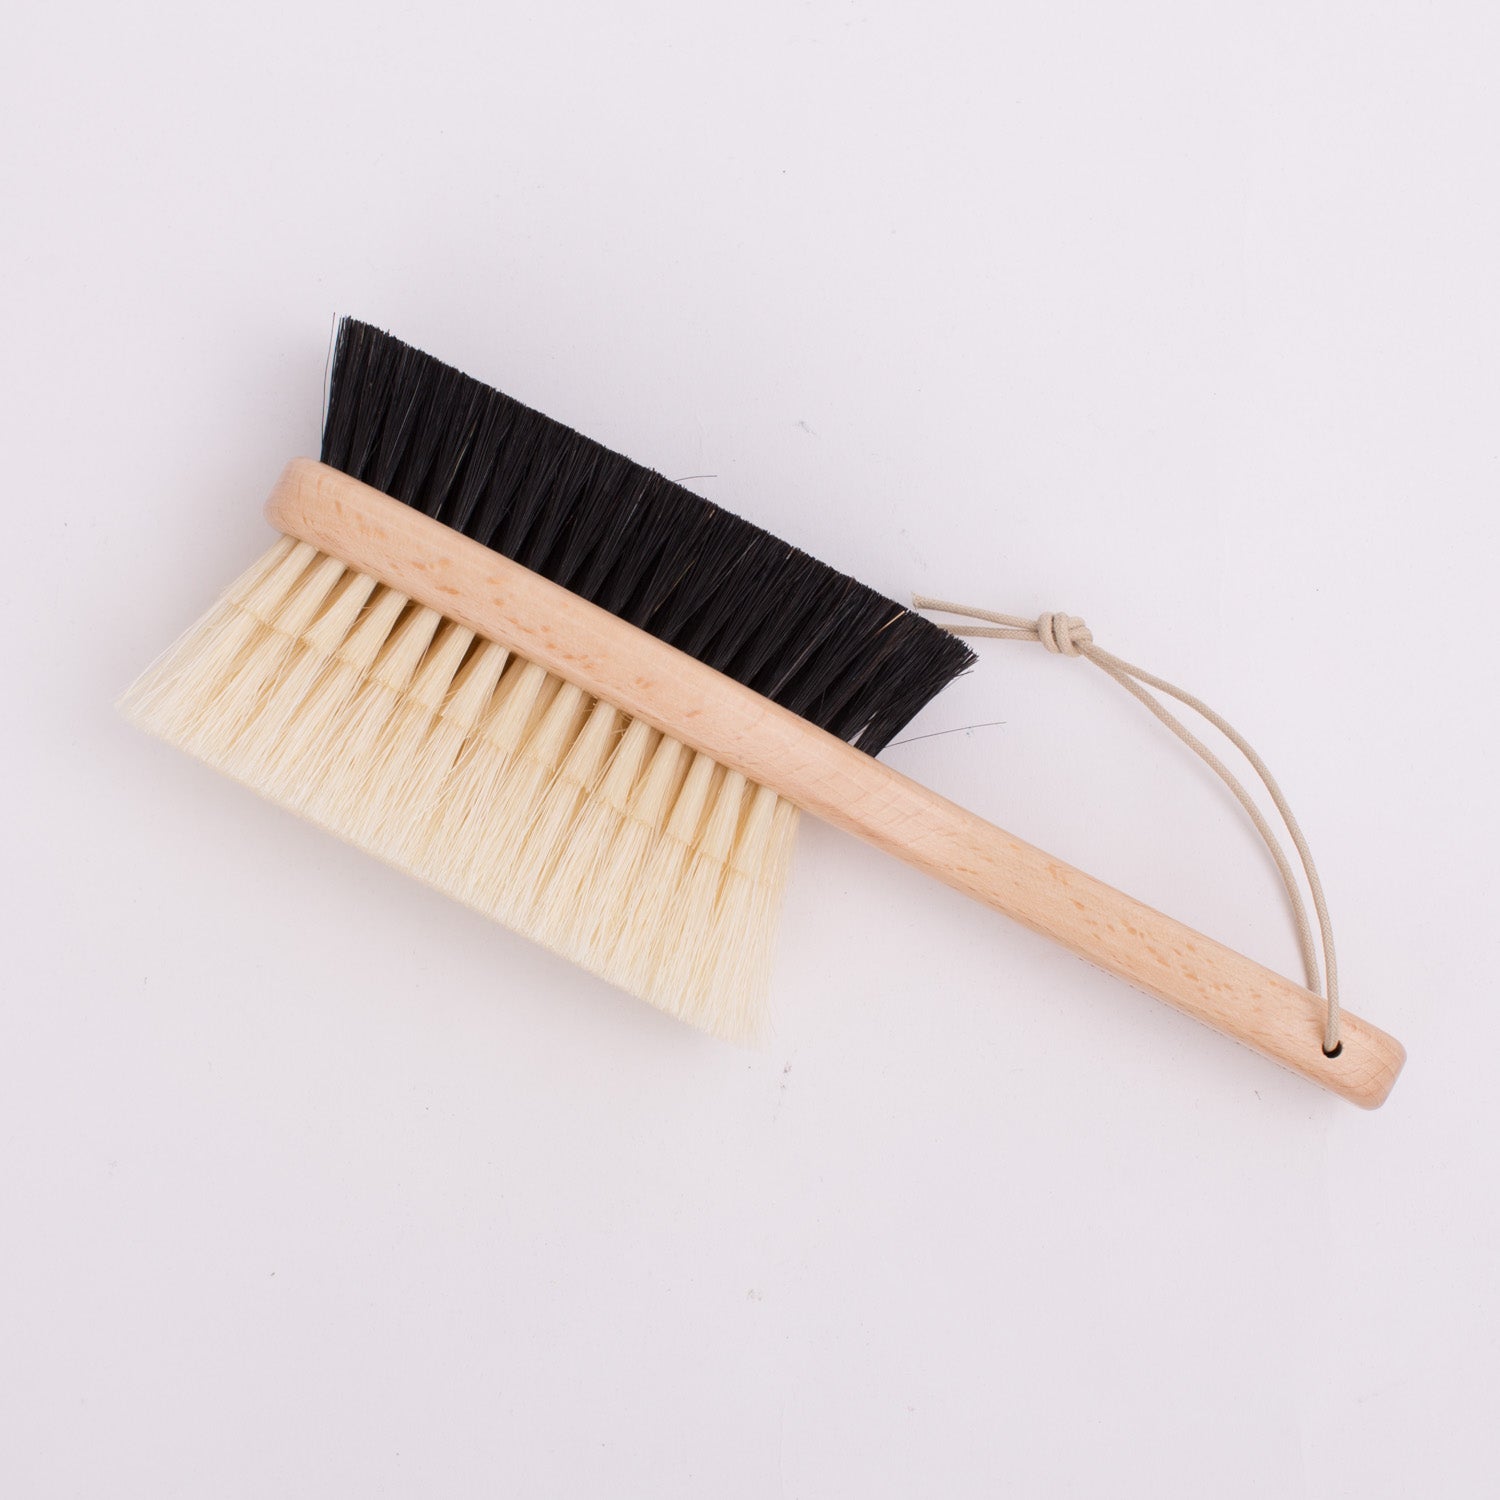 A KirbyAllison.com Deluxe Double-Sided Garment Brush with black and white bristles.